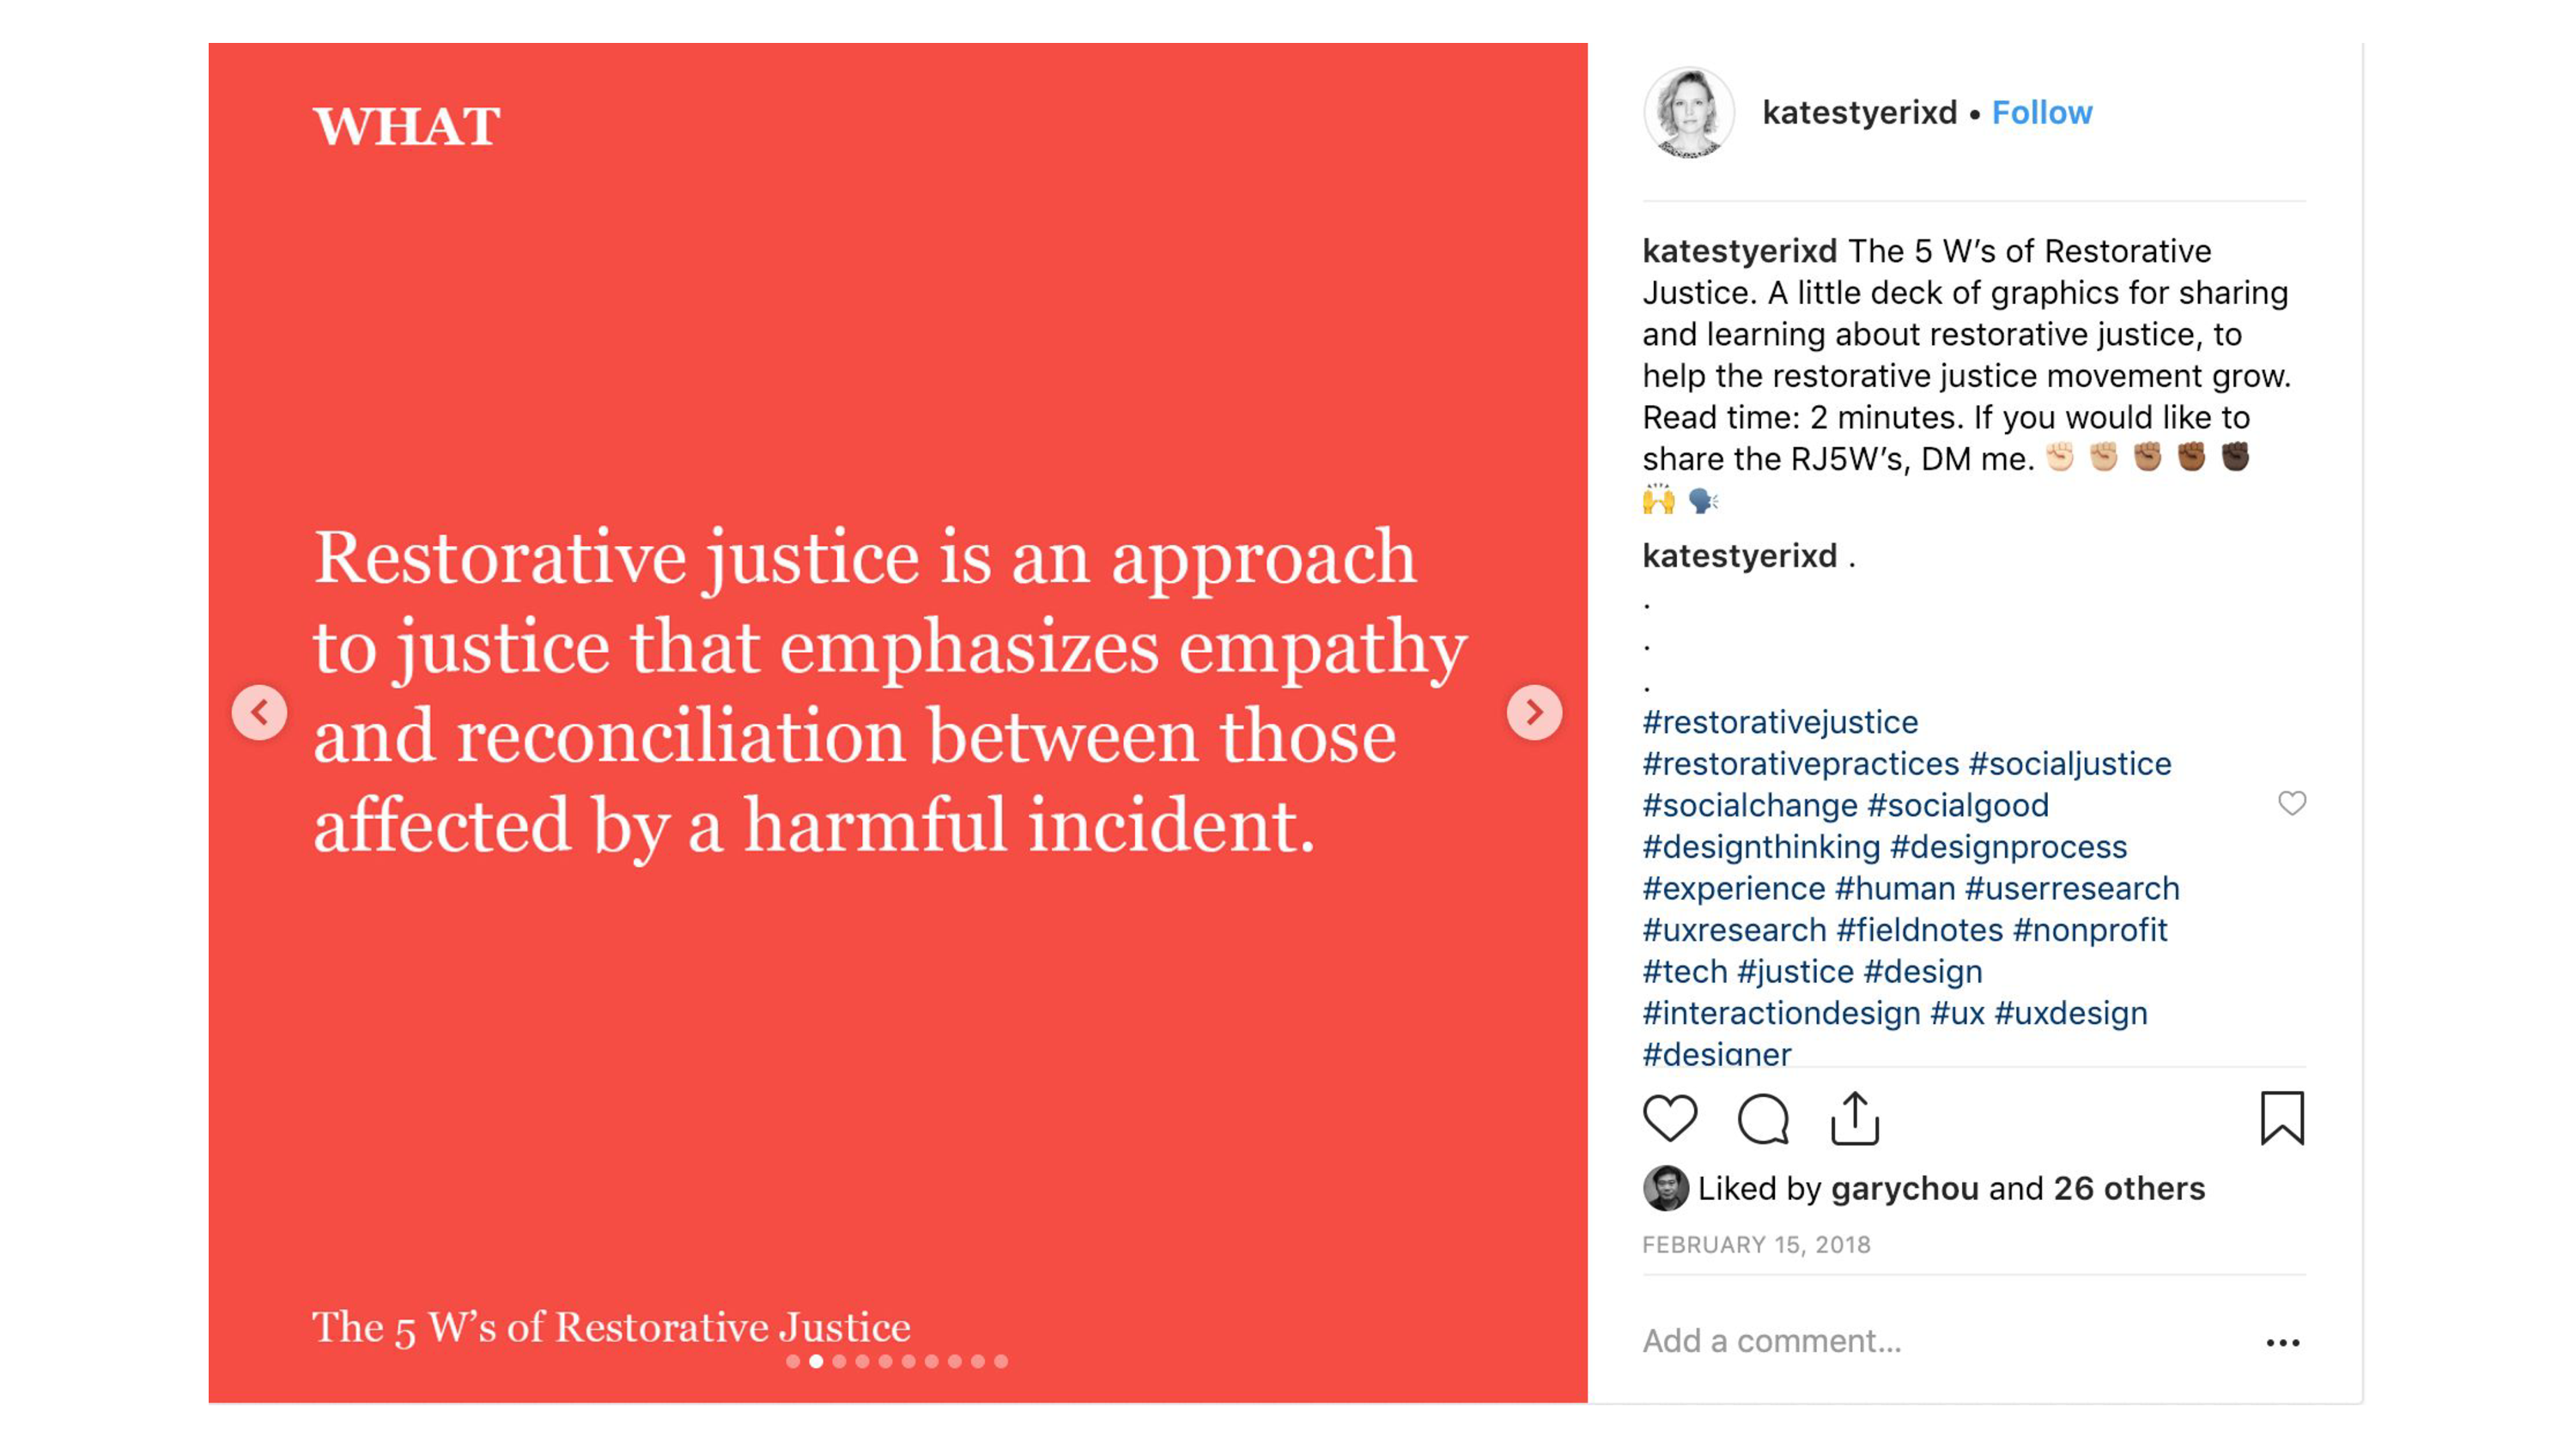 Screenshots of Initial Community Offerings from Kate Styer on restorative justice, and Addi Hou on parental concerns around technology